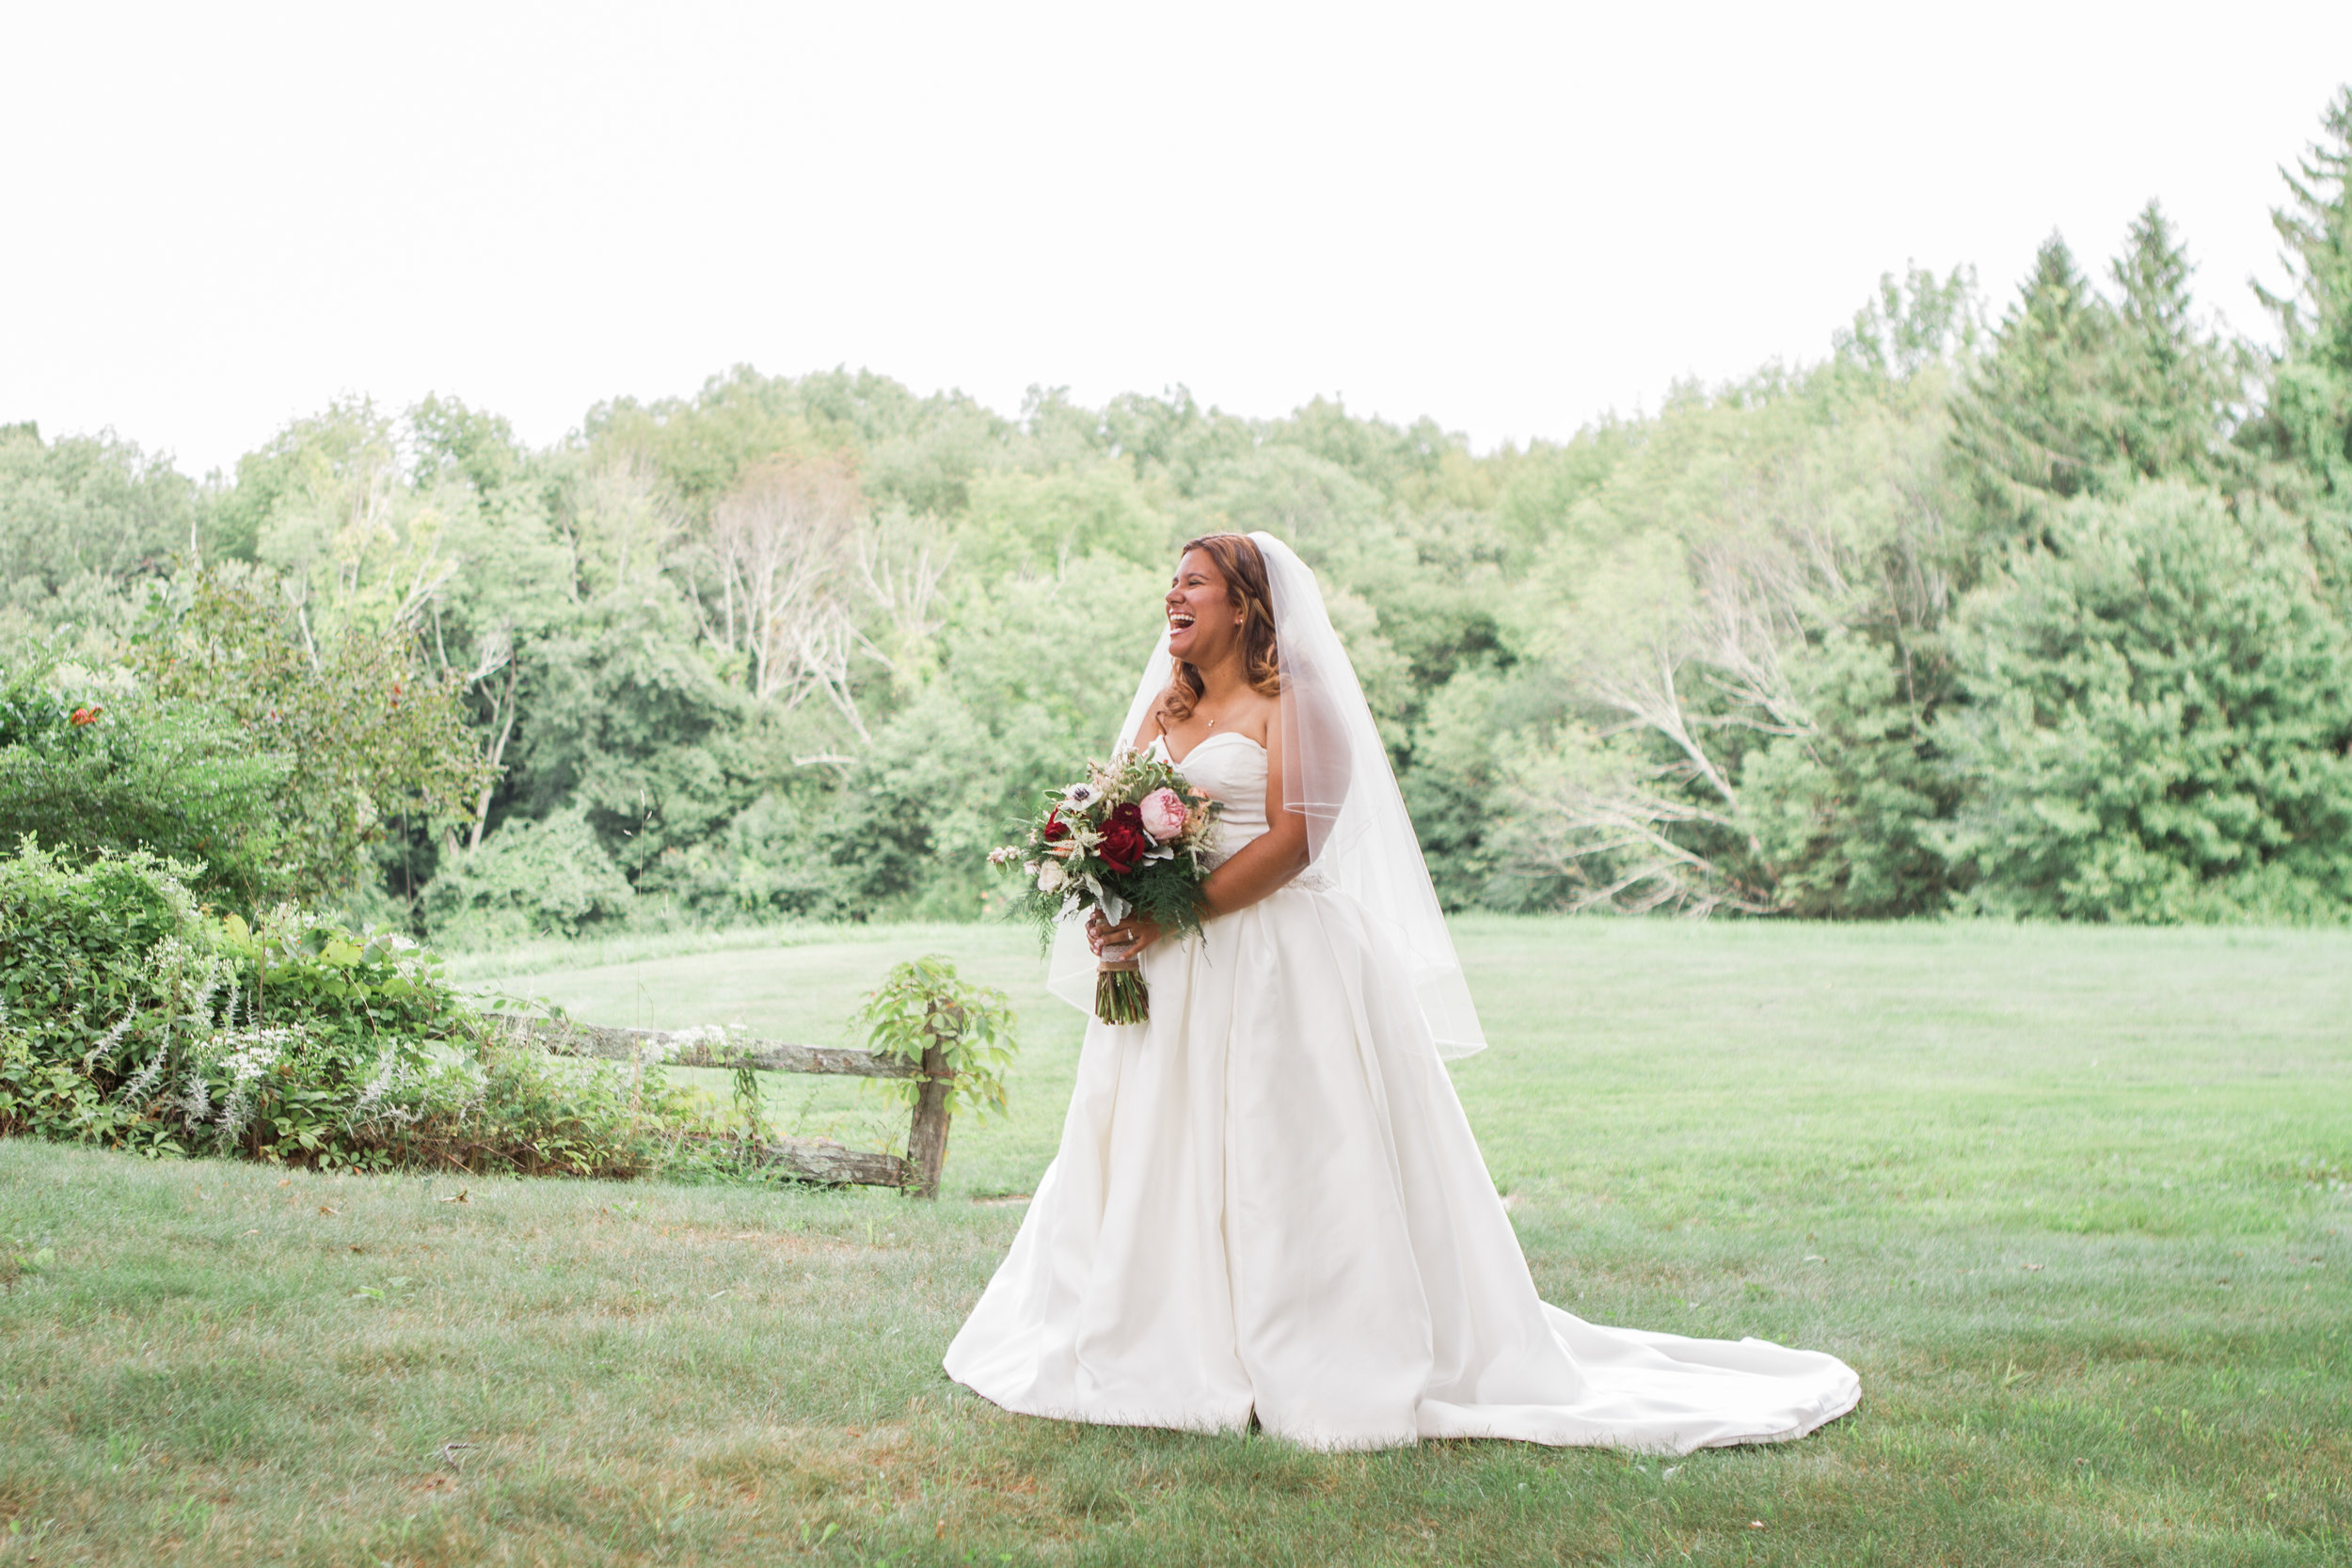 Carrie and Patrick Tyrone Farm Wedding Photographer in Pomfret Connecticut by Shannon Sorensen Photography